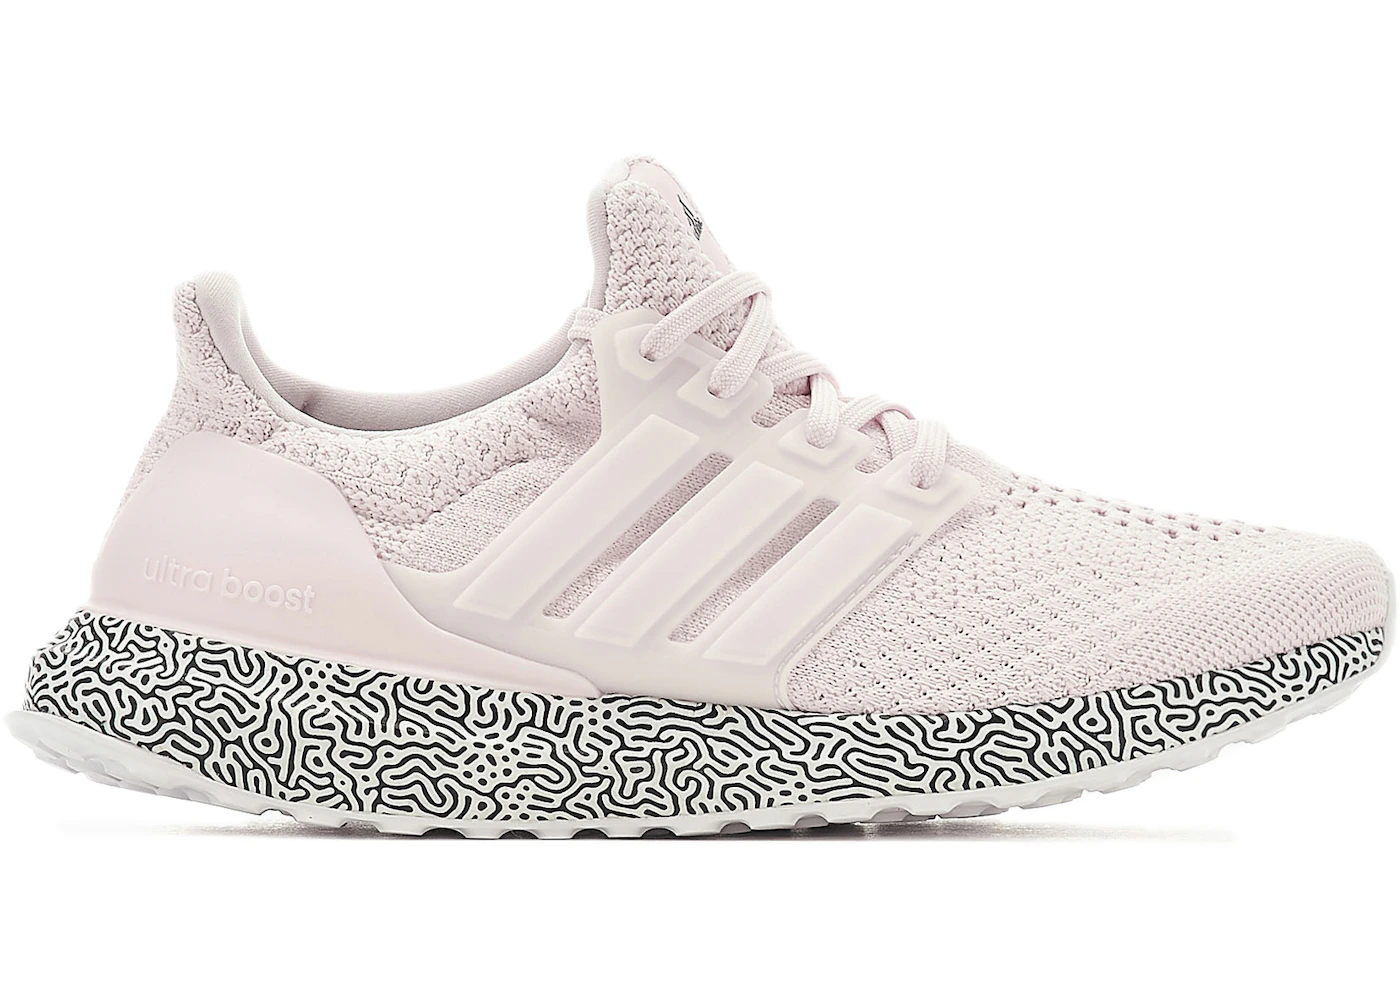 adidas Ultra Boost DNA Almost Pink (Women's) - GV8720 - US